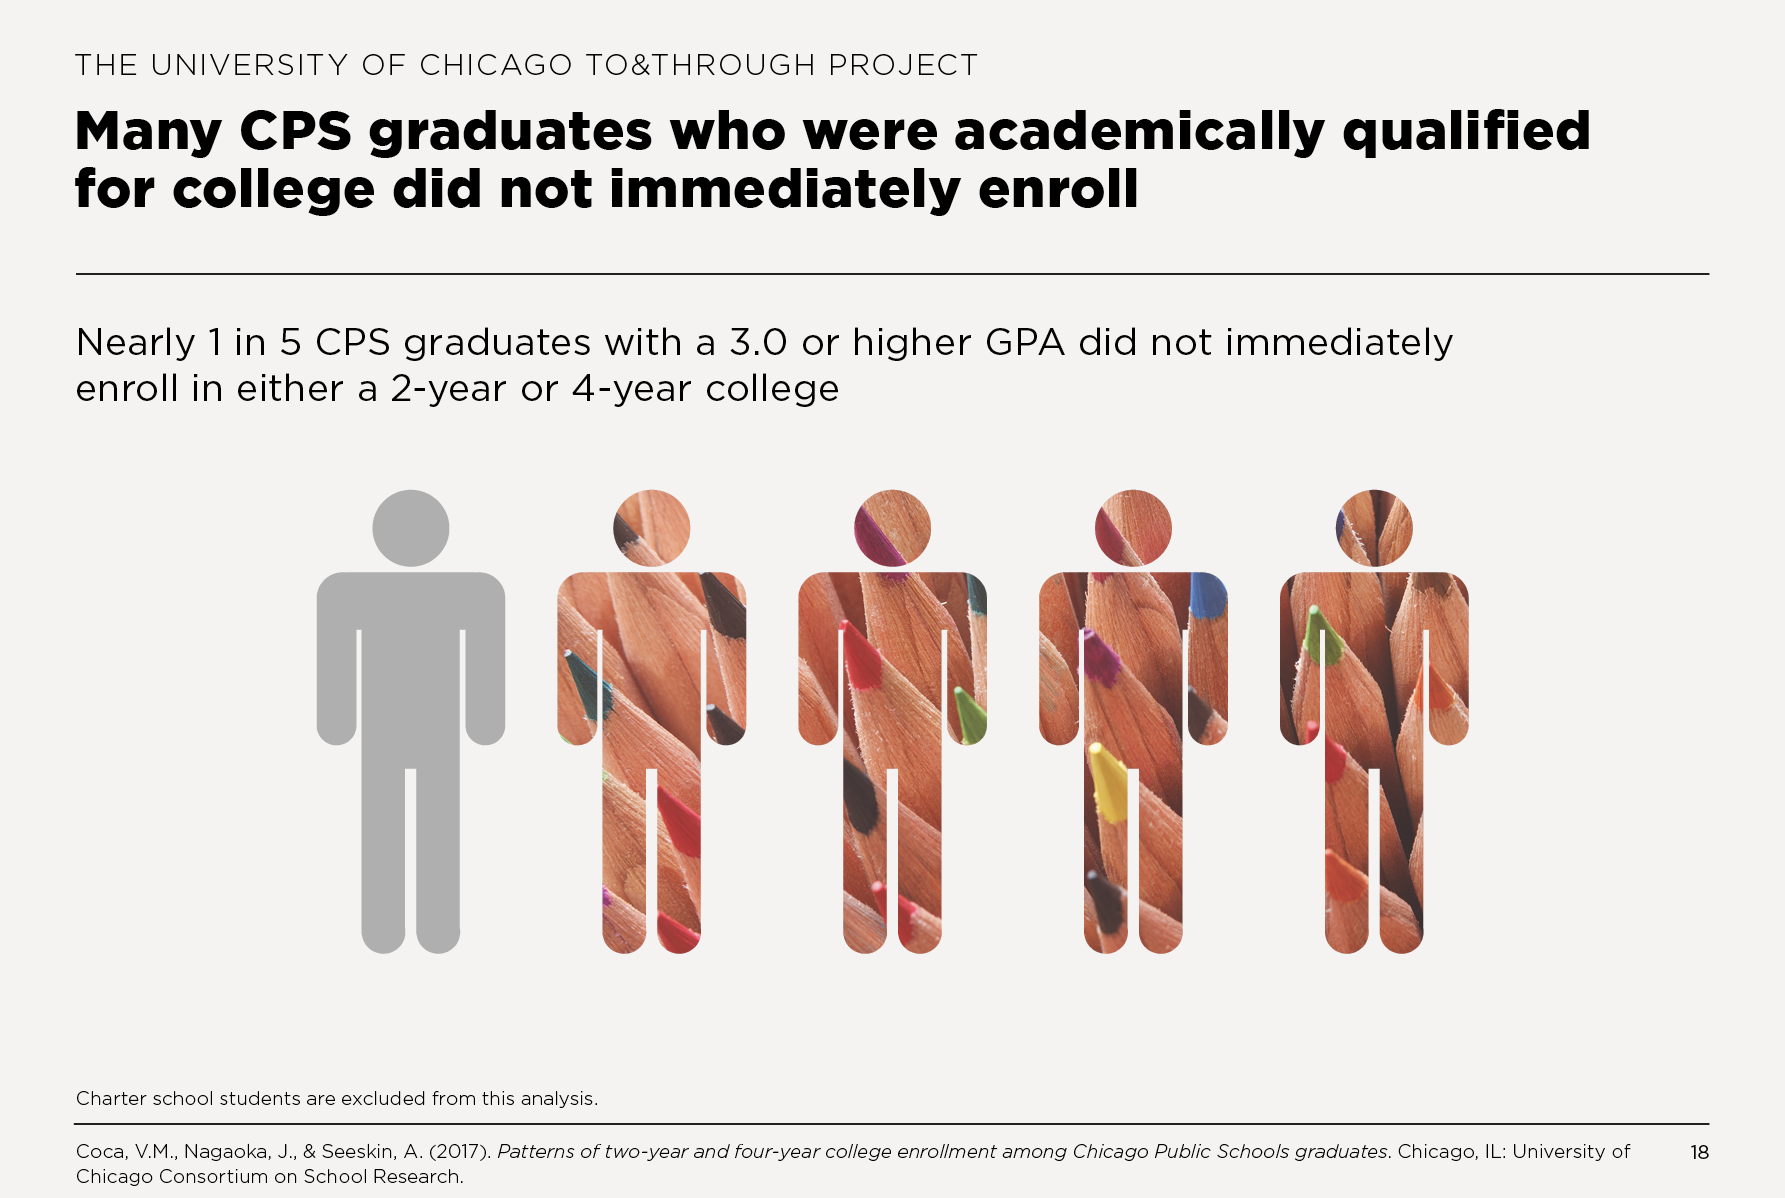 Many CPS graduates who were academically qualified for college did not immediately enroll